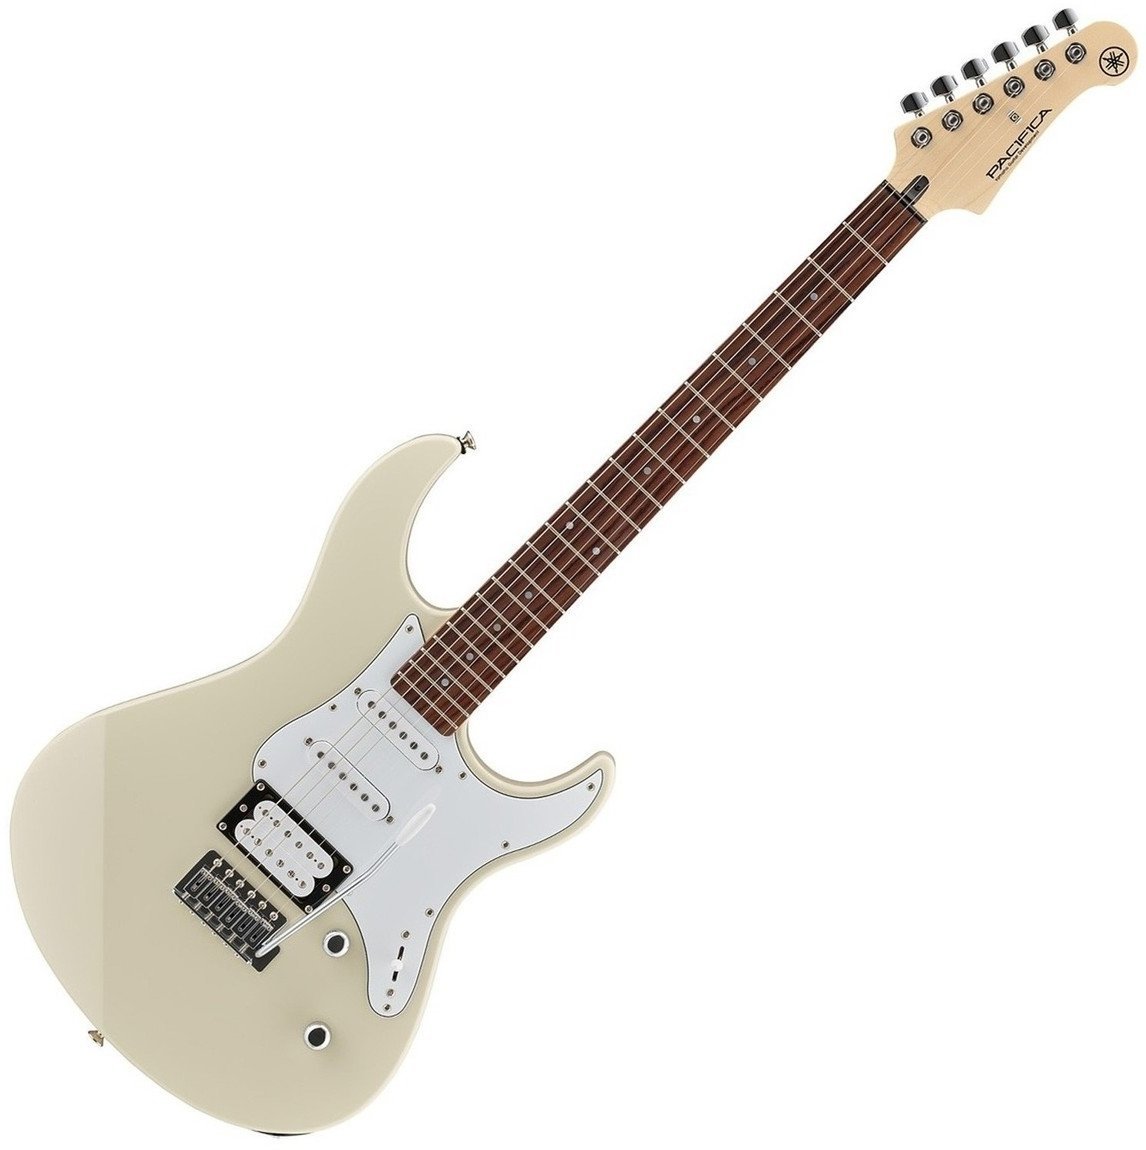 Electric guitar Yamaha Pacifica 112 V Vintage White